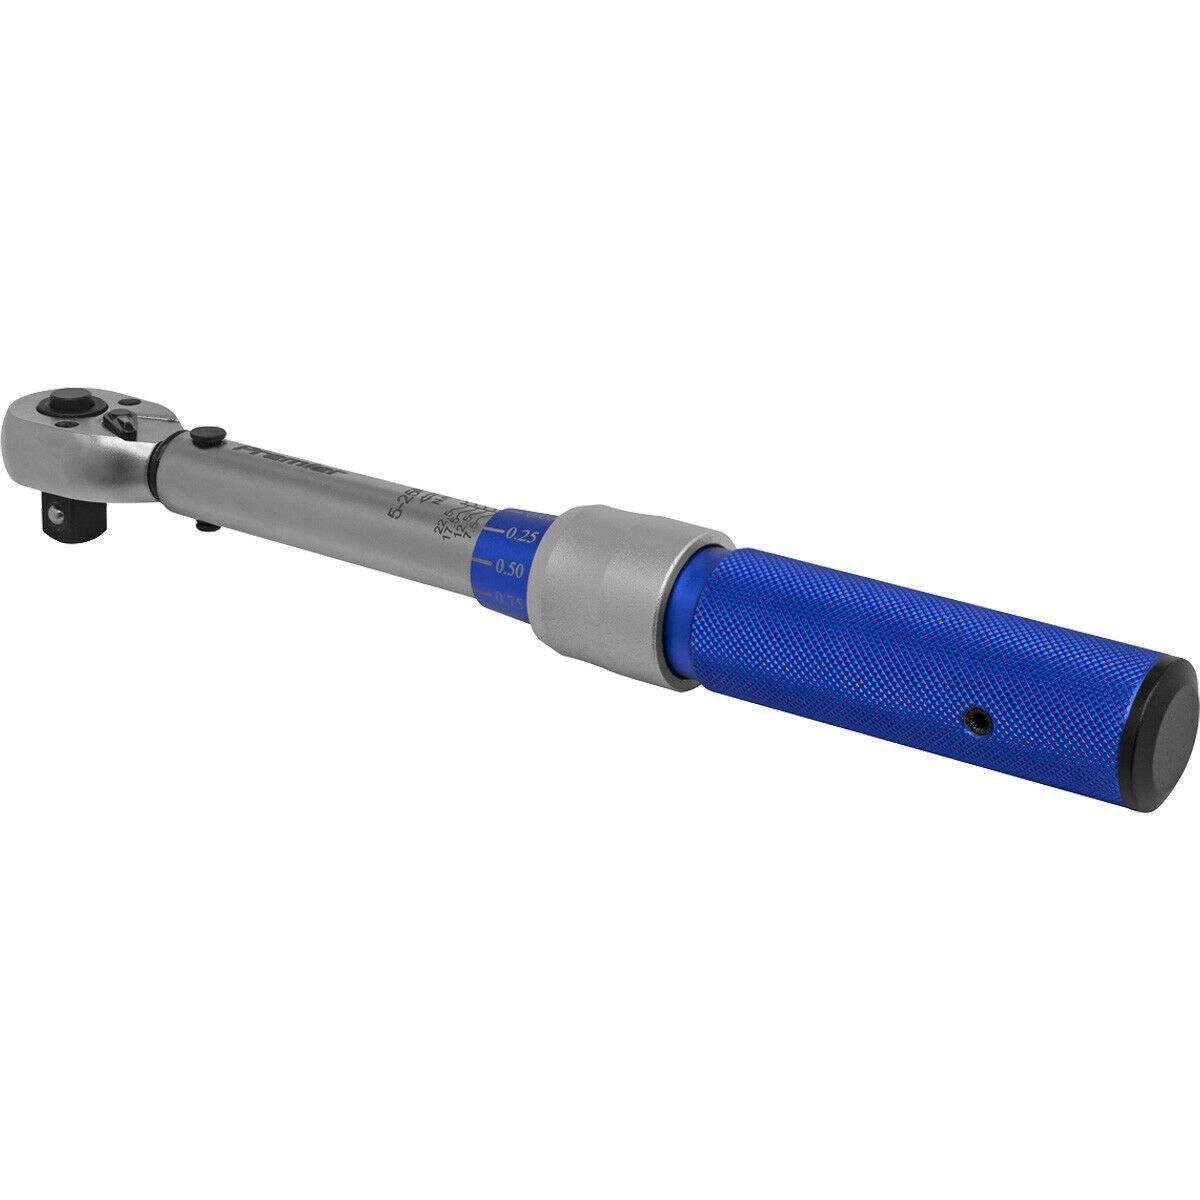 Micrometer Style Torque Wrench - 3/8